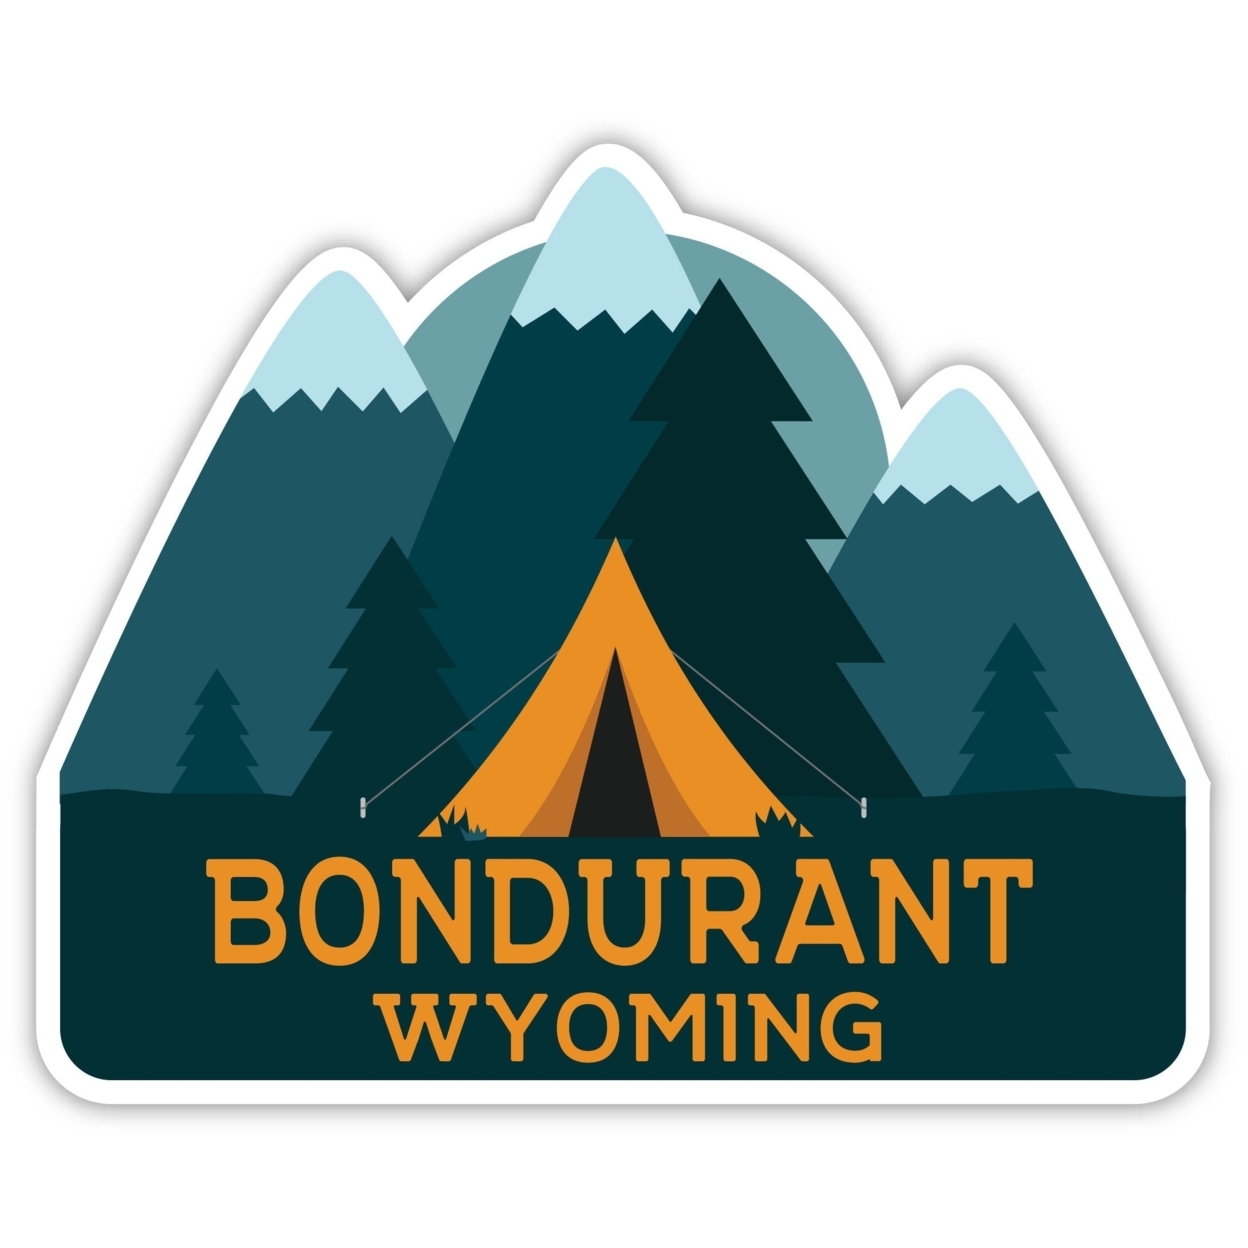 Bondurant Wyoming Souvenir Decorative Stickers (Choose Theme And Size) - 4-Pack, 6-Inch, Tent